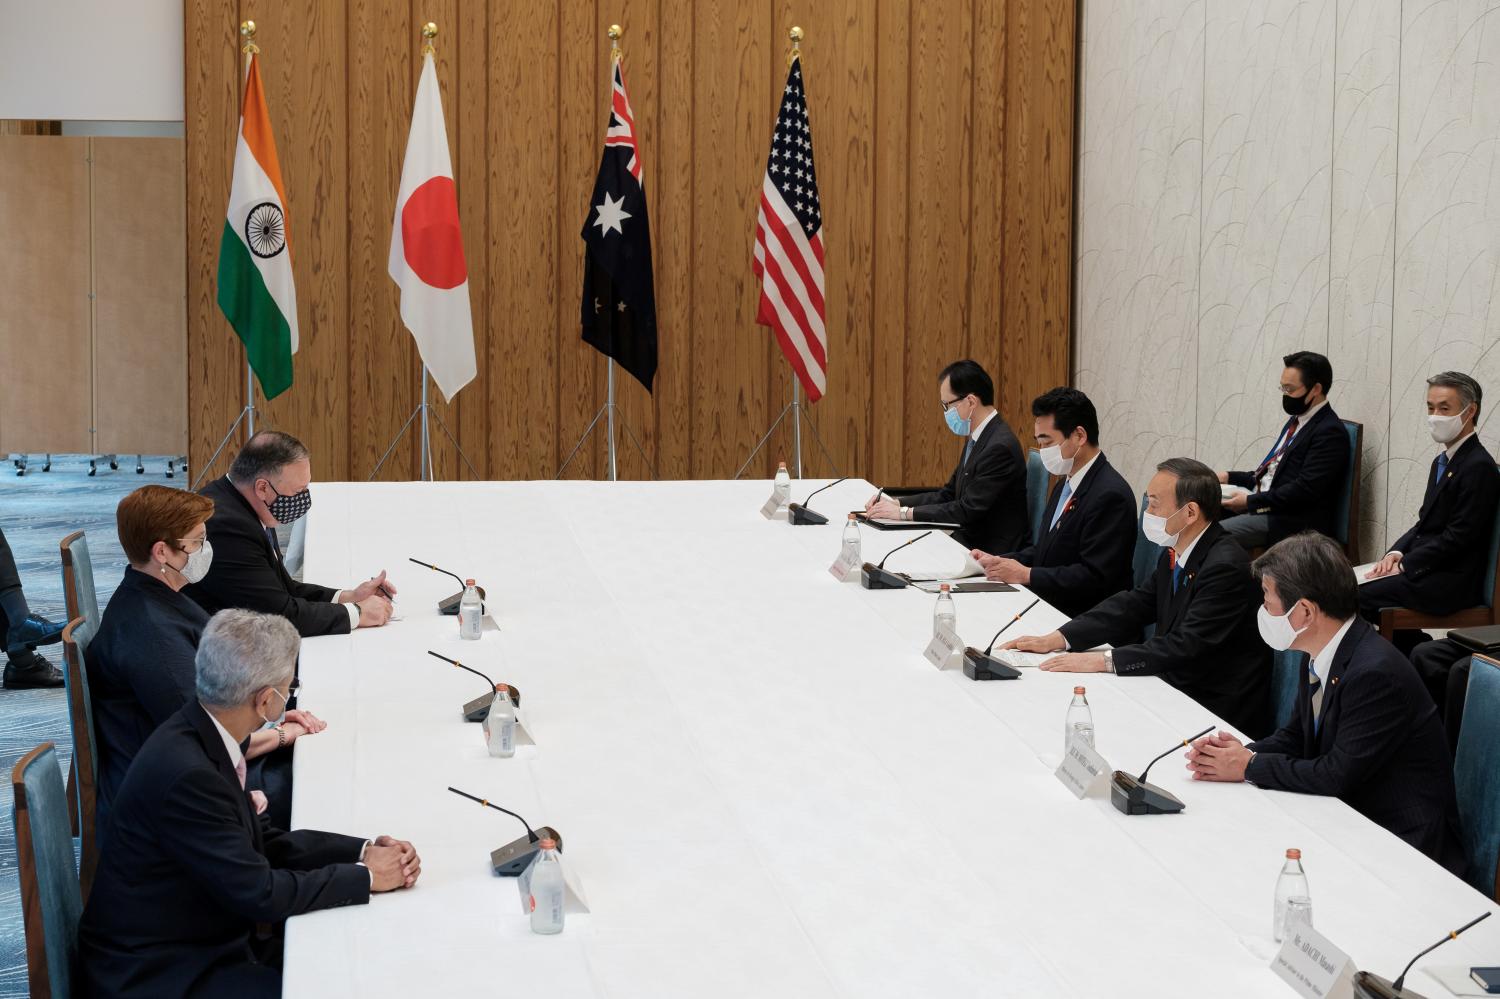 India's Foreign Minister Subrahmanyam Jaishankar, Japan's counterpart Toshimitsu Motegi, Japan's Prime Minister Yoshihide Suga, Australian Foreign Minister Marise Payne and U.S. Secretary of State Mike Pompeo attend the meeting at the prime miniter's office in Tokyo, Japan October 6, 2020.  Nicolas Datiche/Pool via REUTERS